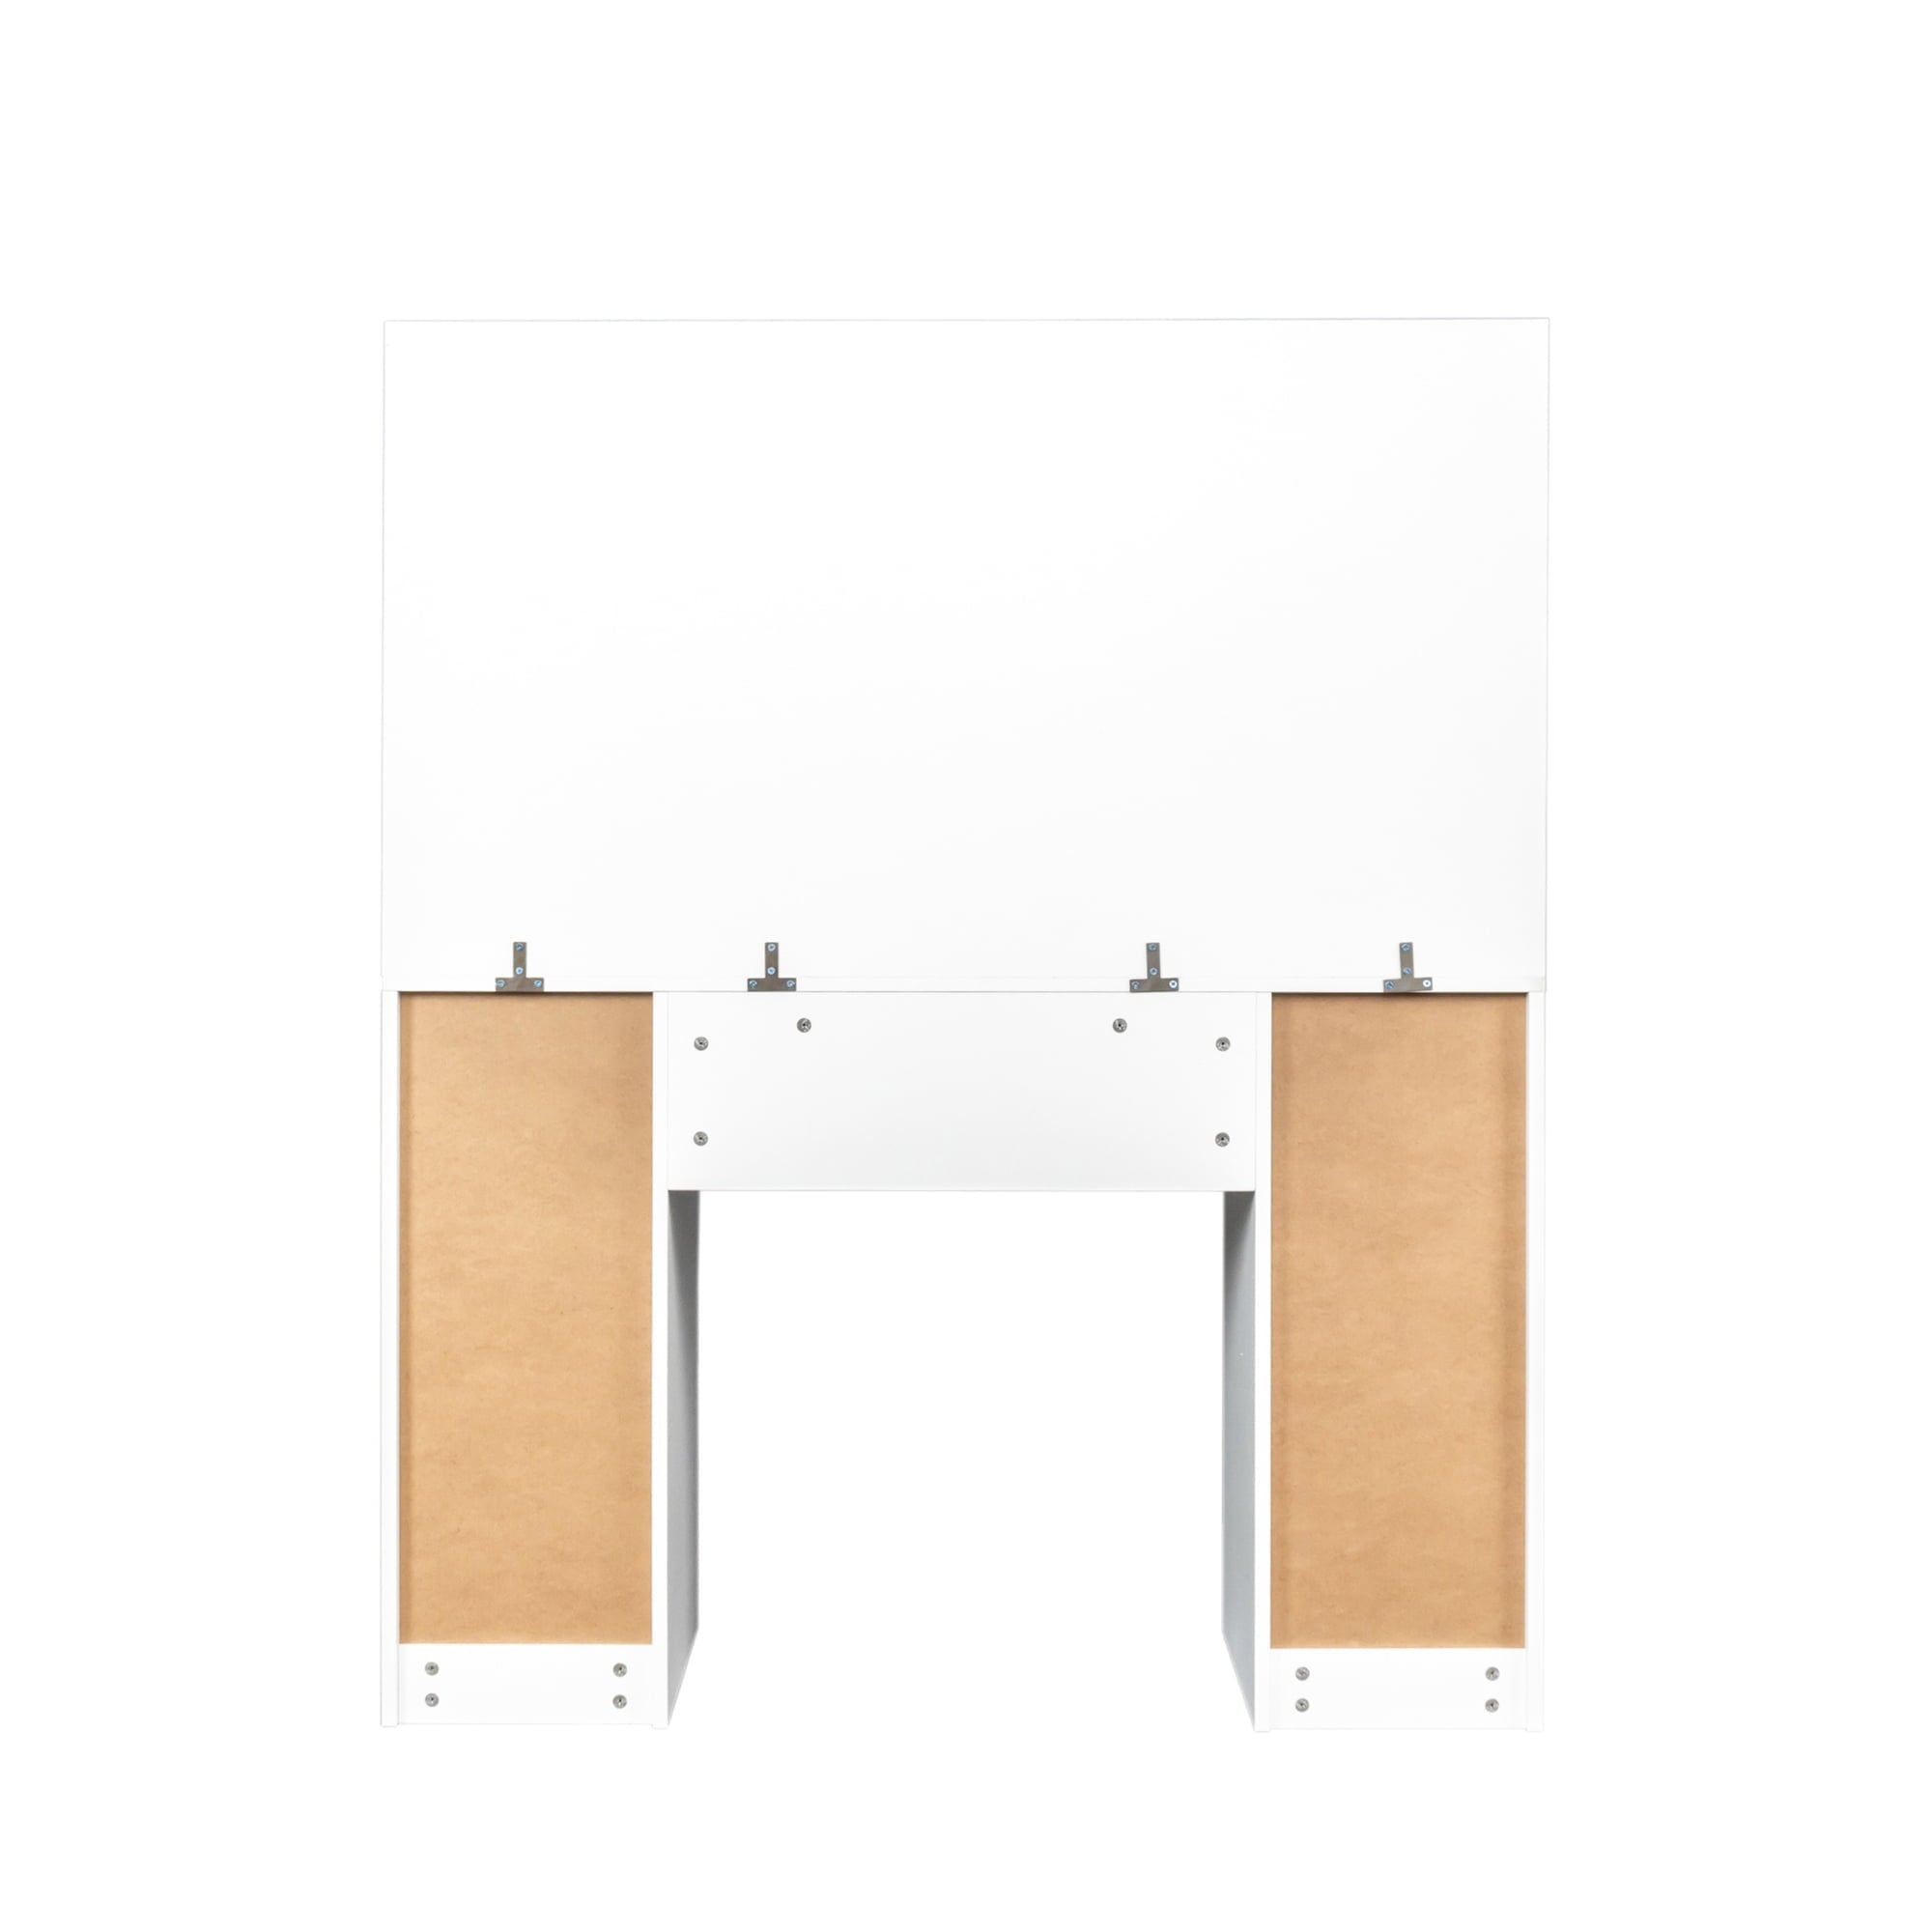 SUGIFT Modern Vanity Table with Mirror, White Finish, for Bedroom